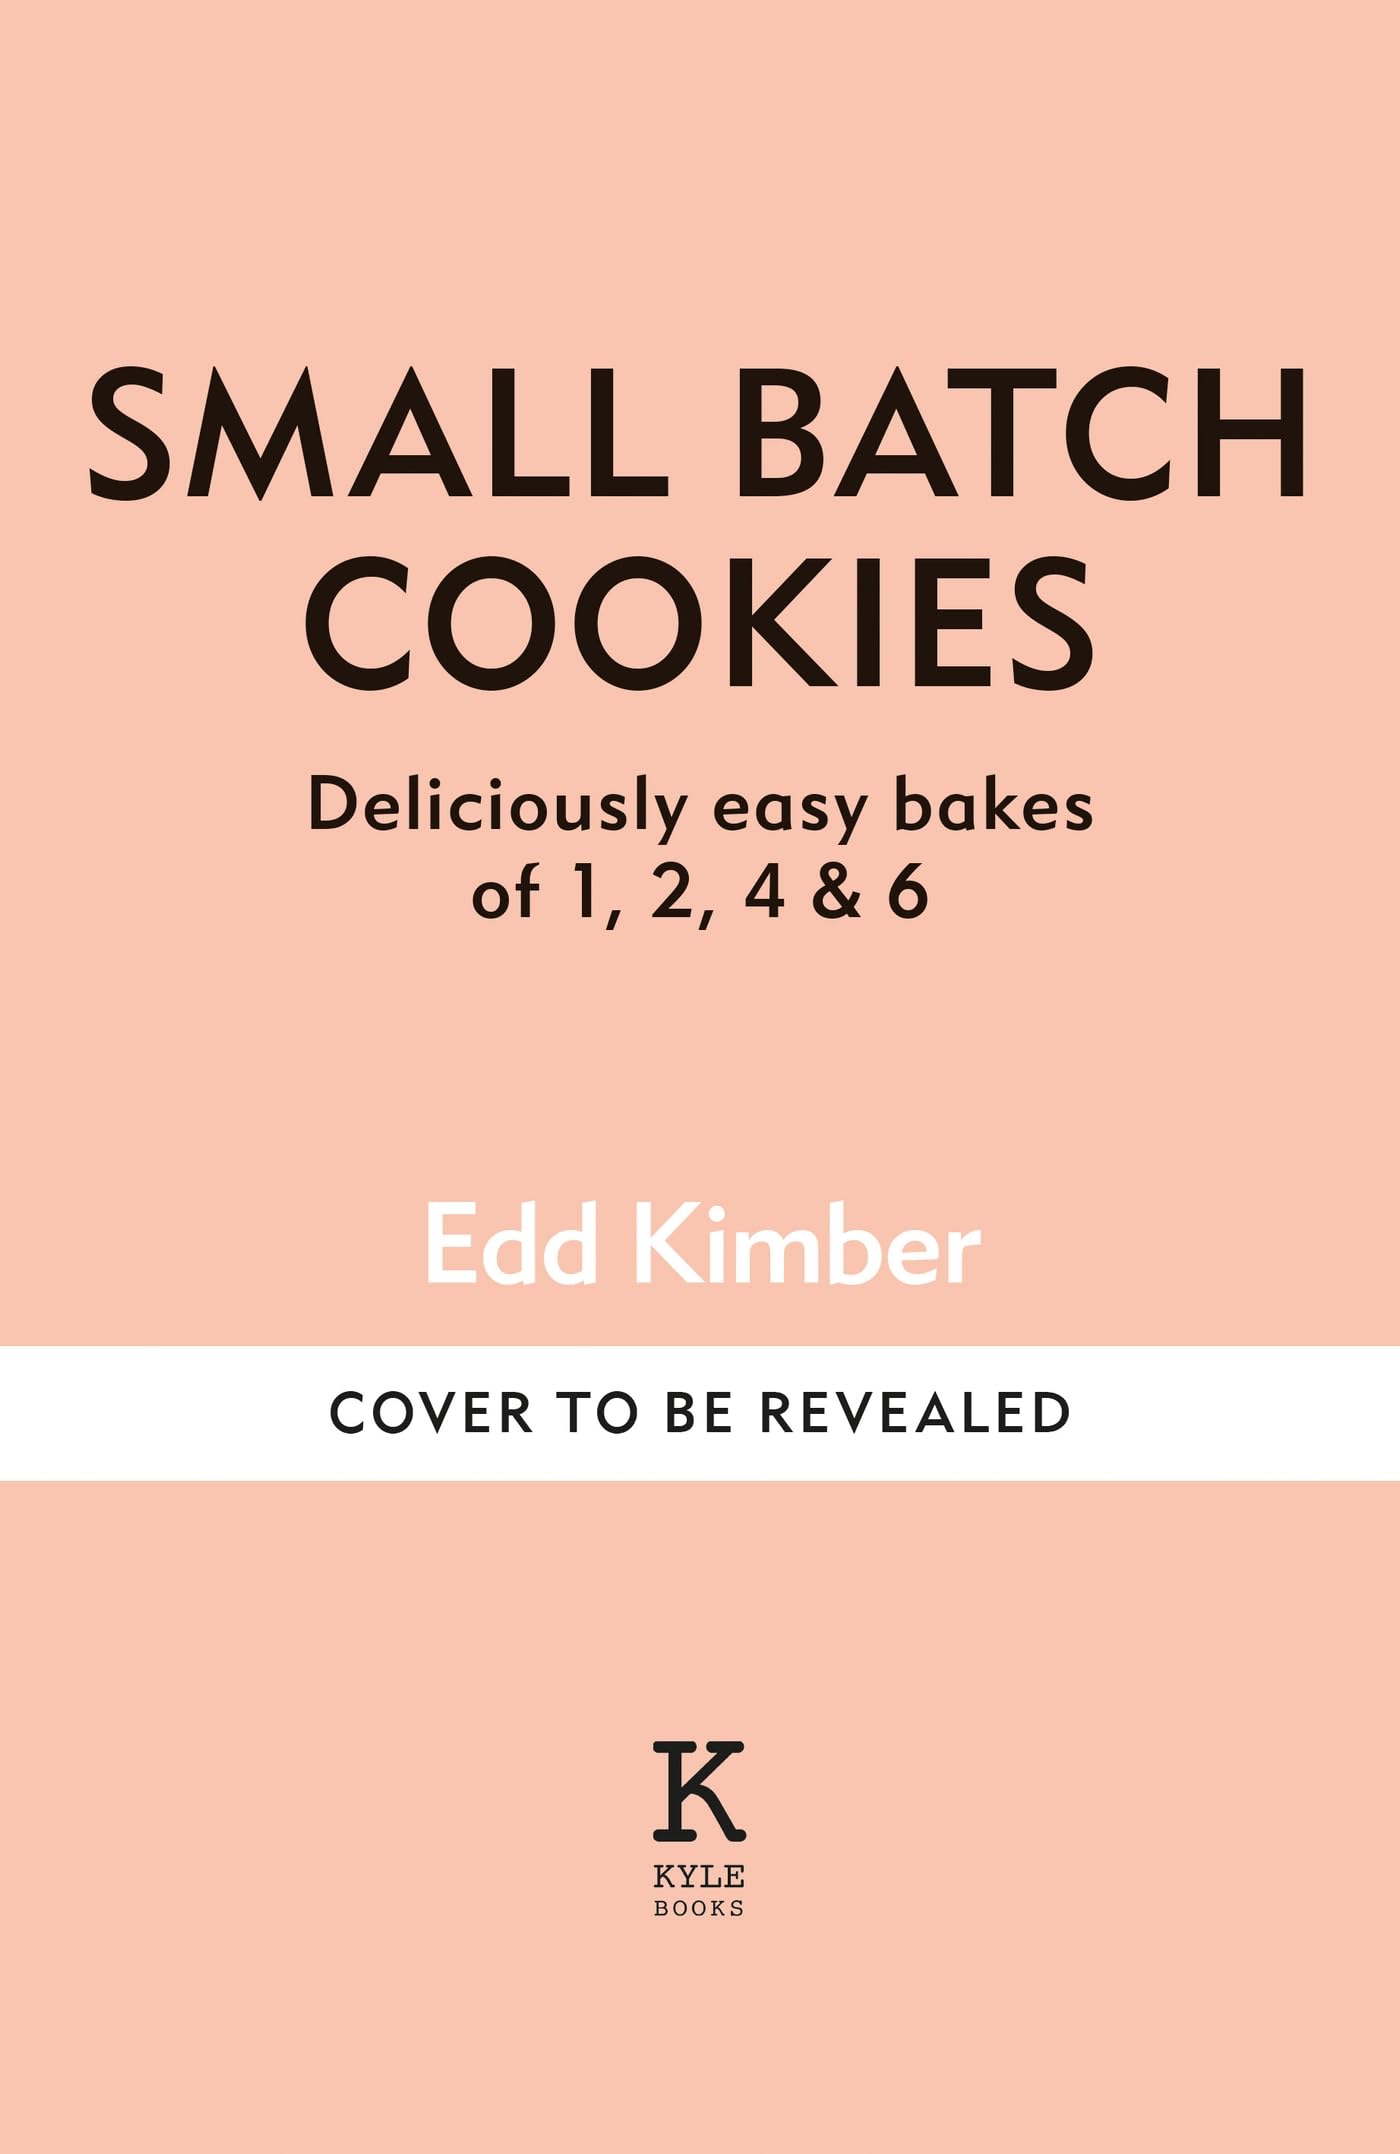 Small Batch Cookies: Deliciously easy bakes of 1, 2, 4 & 6